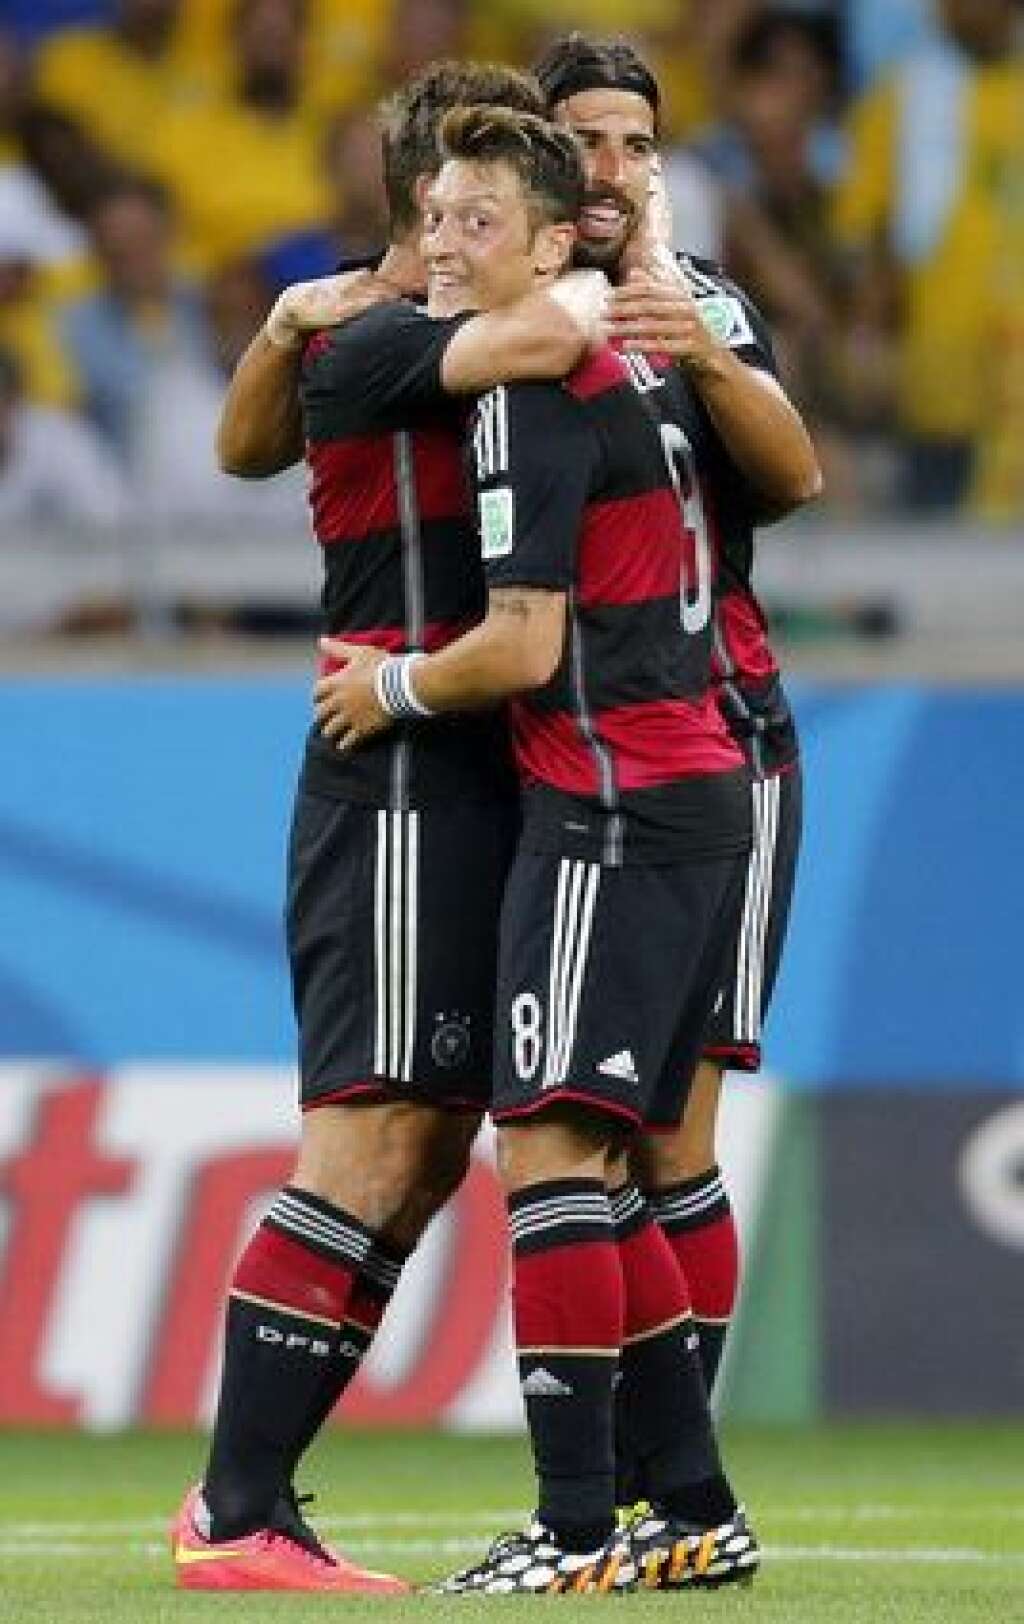 Brazil Soccer WCup Brazil Germany - Germany's Miroslav Klose, Mesut Ozil and Sami Khedira, from left, celebrate after scoring during the World Cup semifinal soccer match between Brazil and Germany at the Mineirao Stadium in Belo Horizonte, Brazil, Tuesday, July 8, 2014. (AP Photo/Frank Augstein)